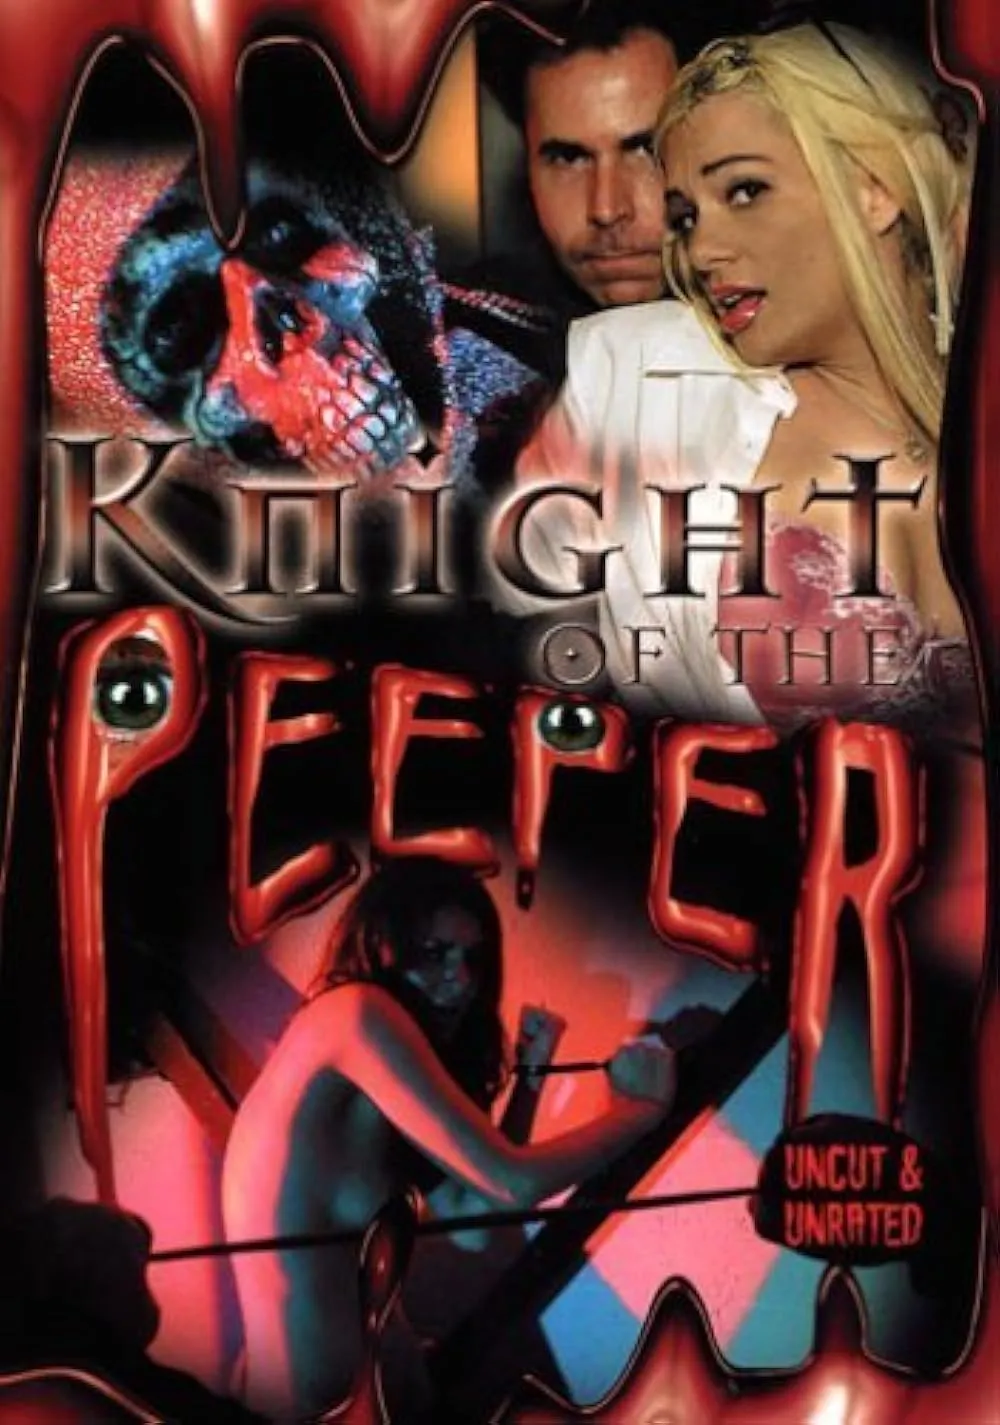 18+ Knight of the Peeper 2006 English 720p HDRip 800MB Download